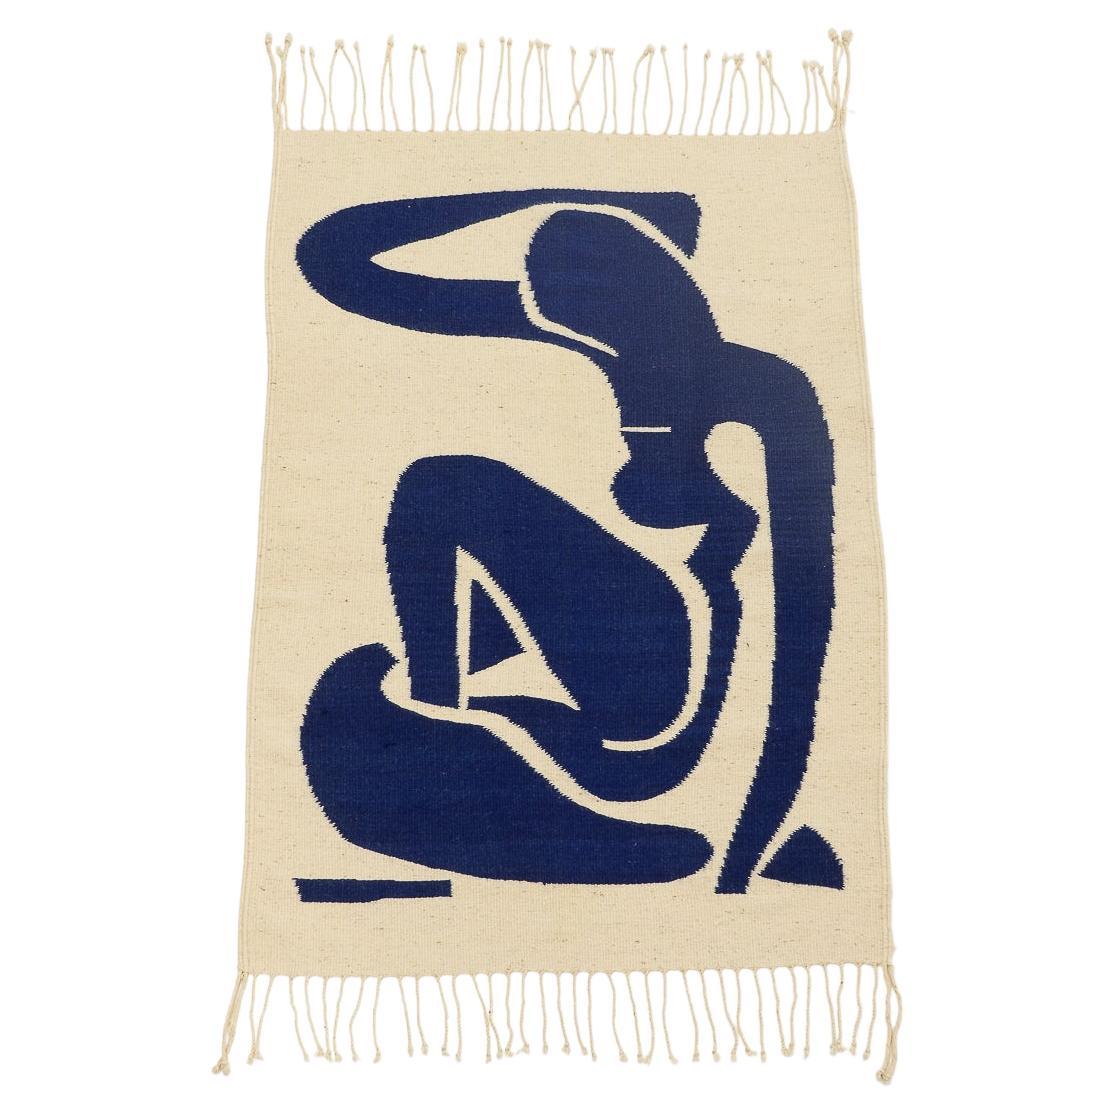 Tapestry Blue Nude, inspired Matisse, 1980s